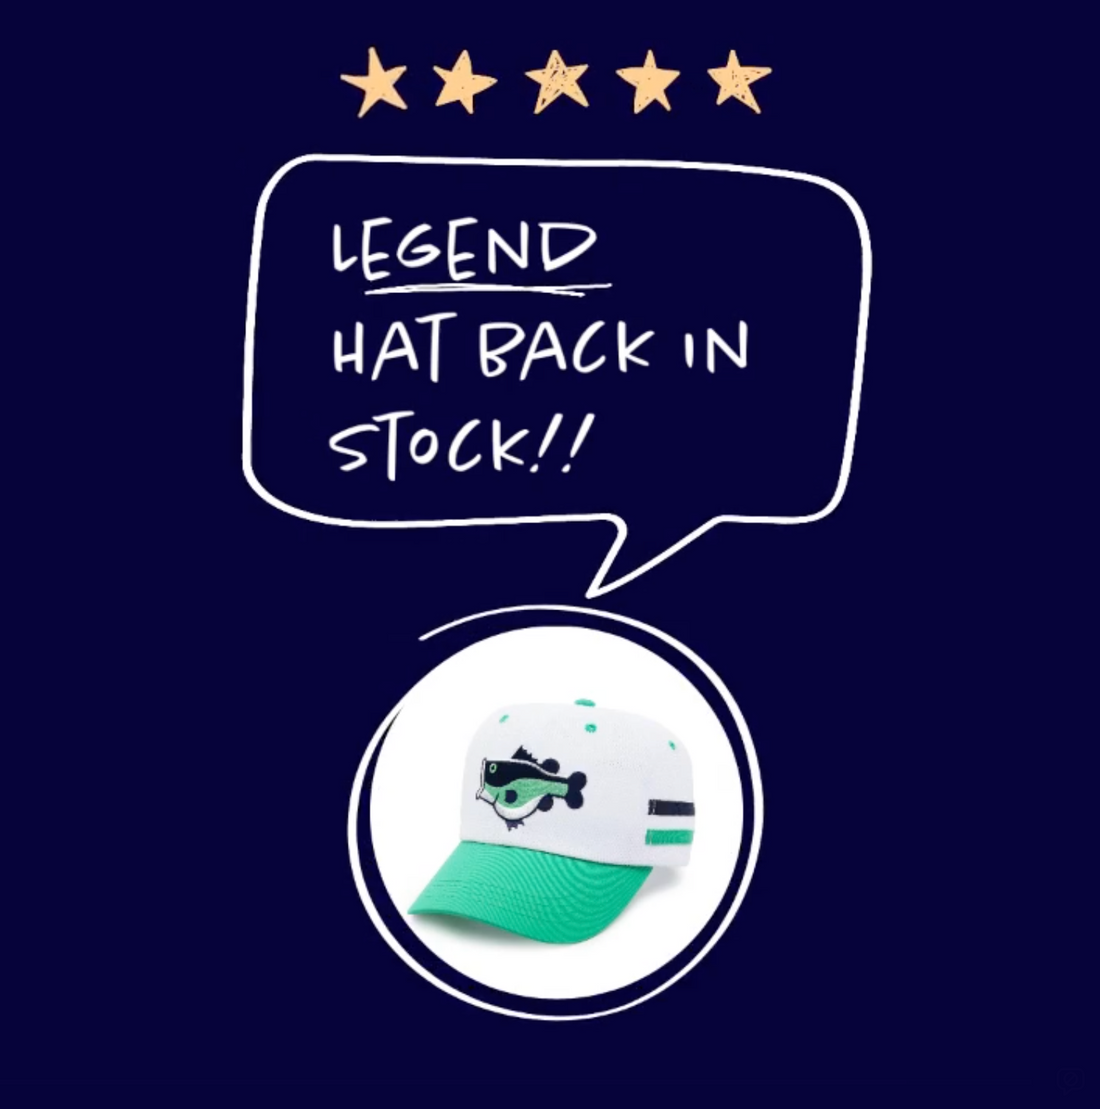 FAT BASS “Legend” Hat now back in stock!